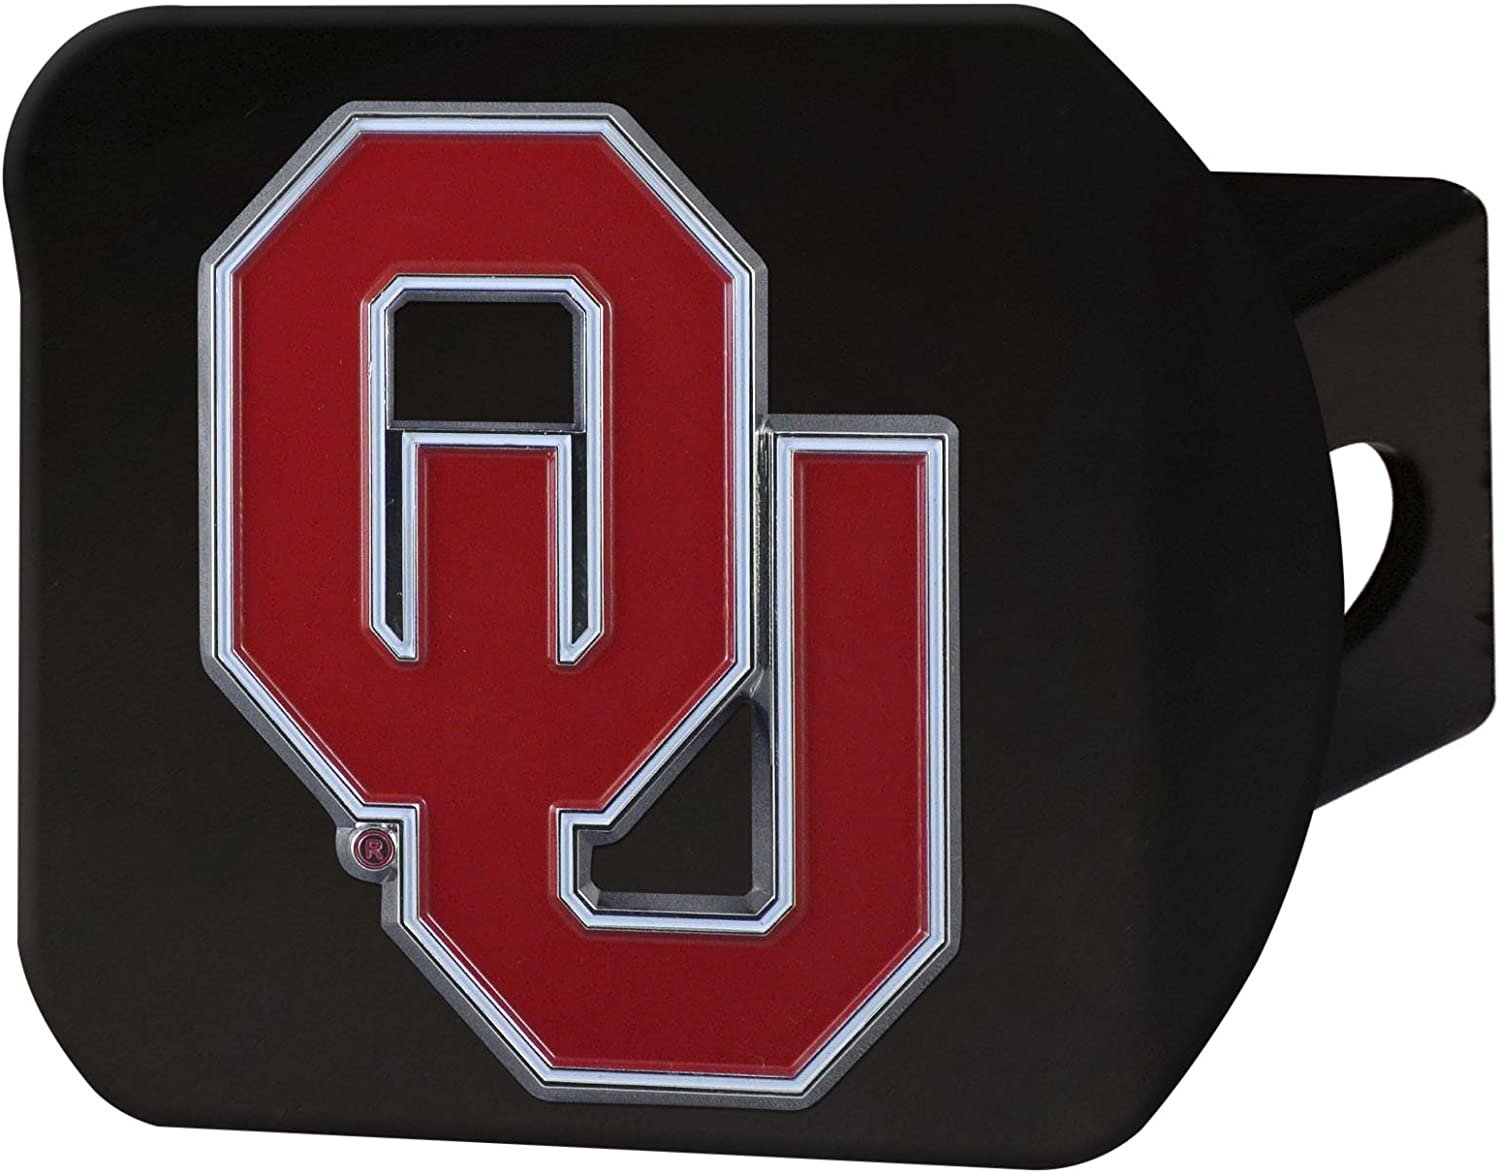 Oklahoma Sooners Solid Metal Black Hitch Cover with Color Metal Emblem 2 Inch Square Type III University of